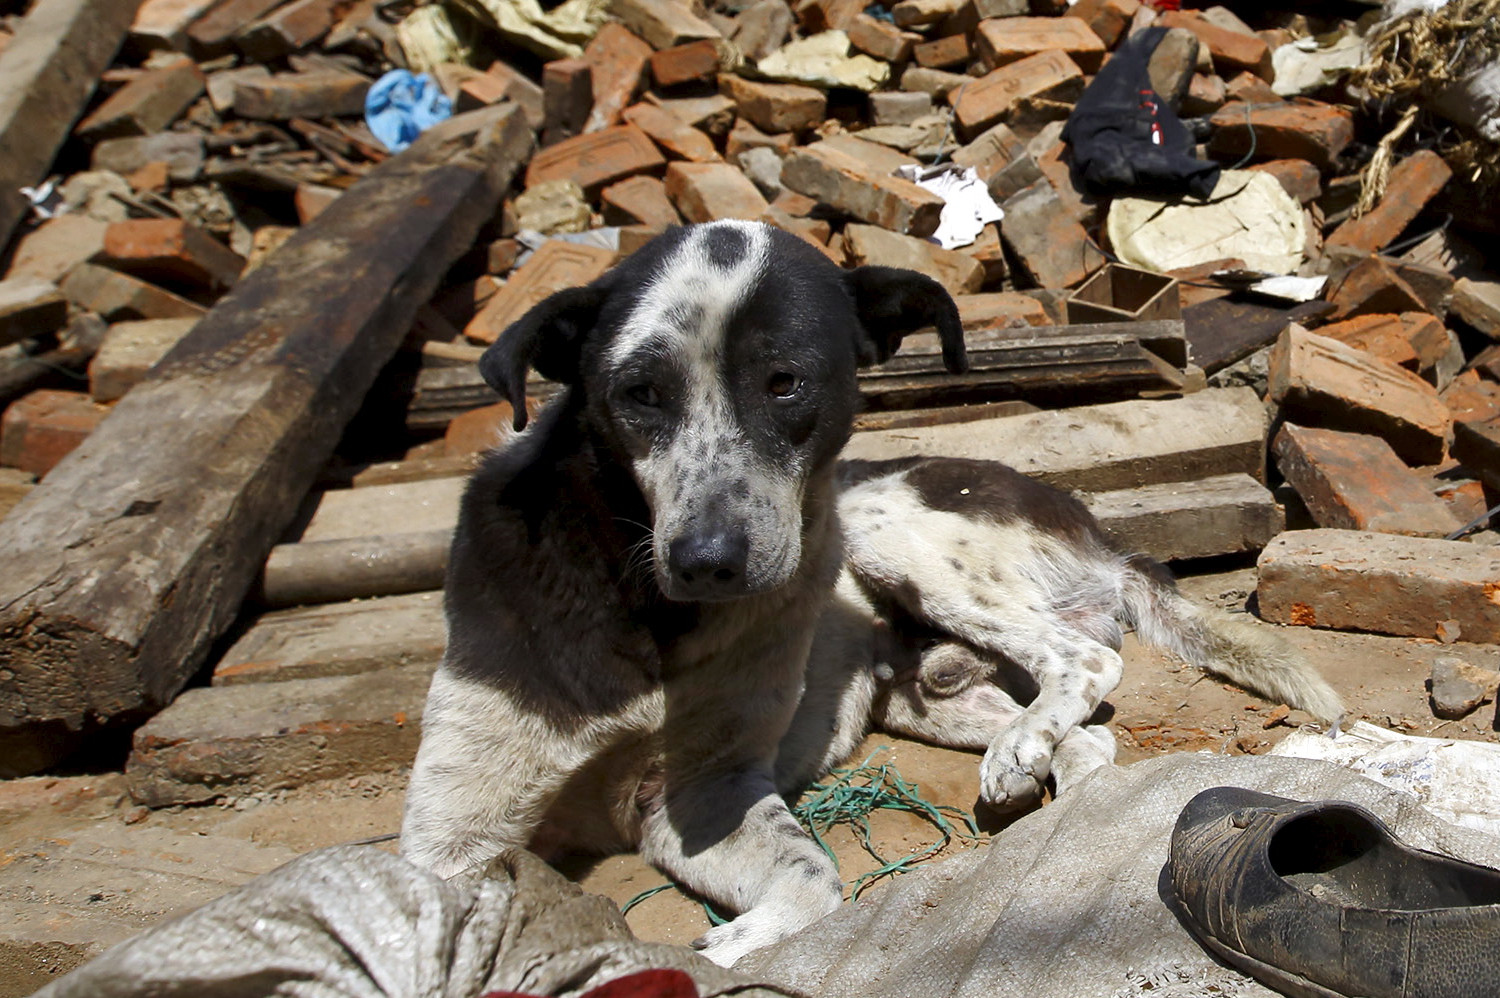 A dog sits in front of a mound of rubble of collapsed houses after Saturday's earthquake in Bhaktapur, Nepal April 27, 2015